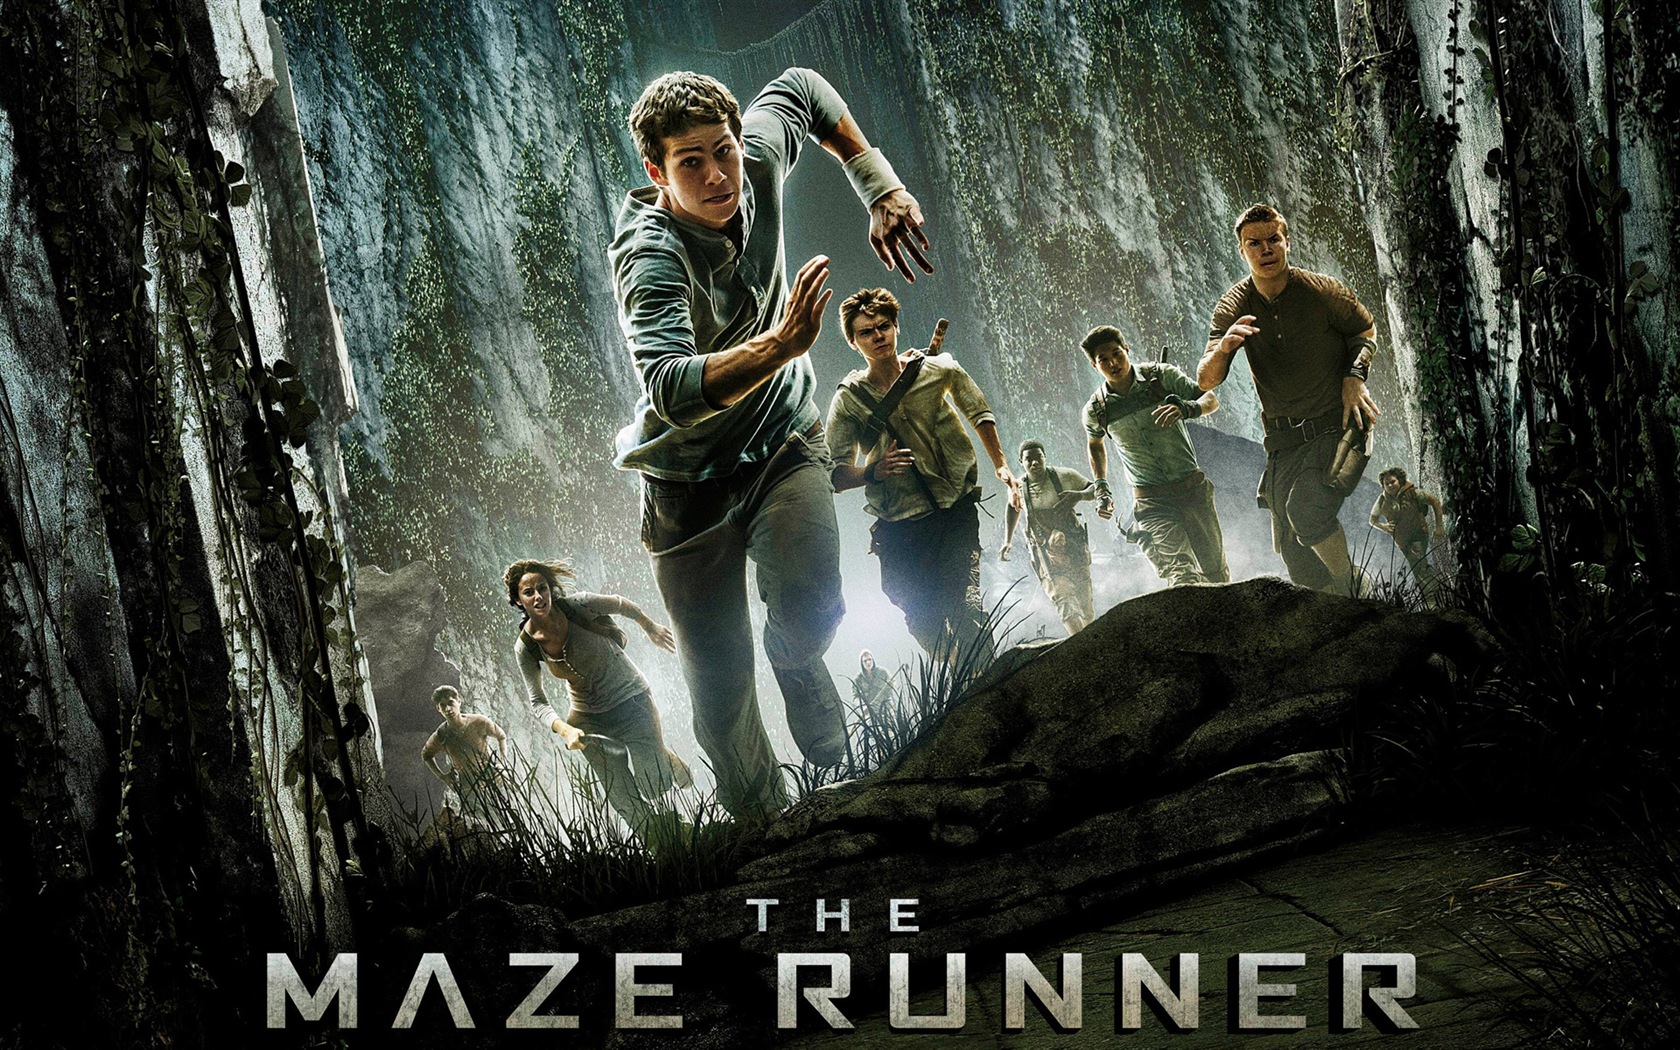 The Maze Runner HD movie wallpapers #2 - 1680x1050